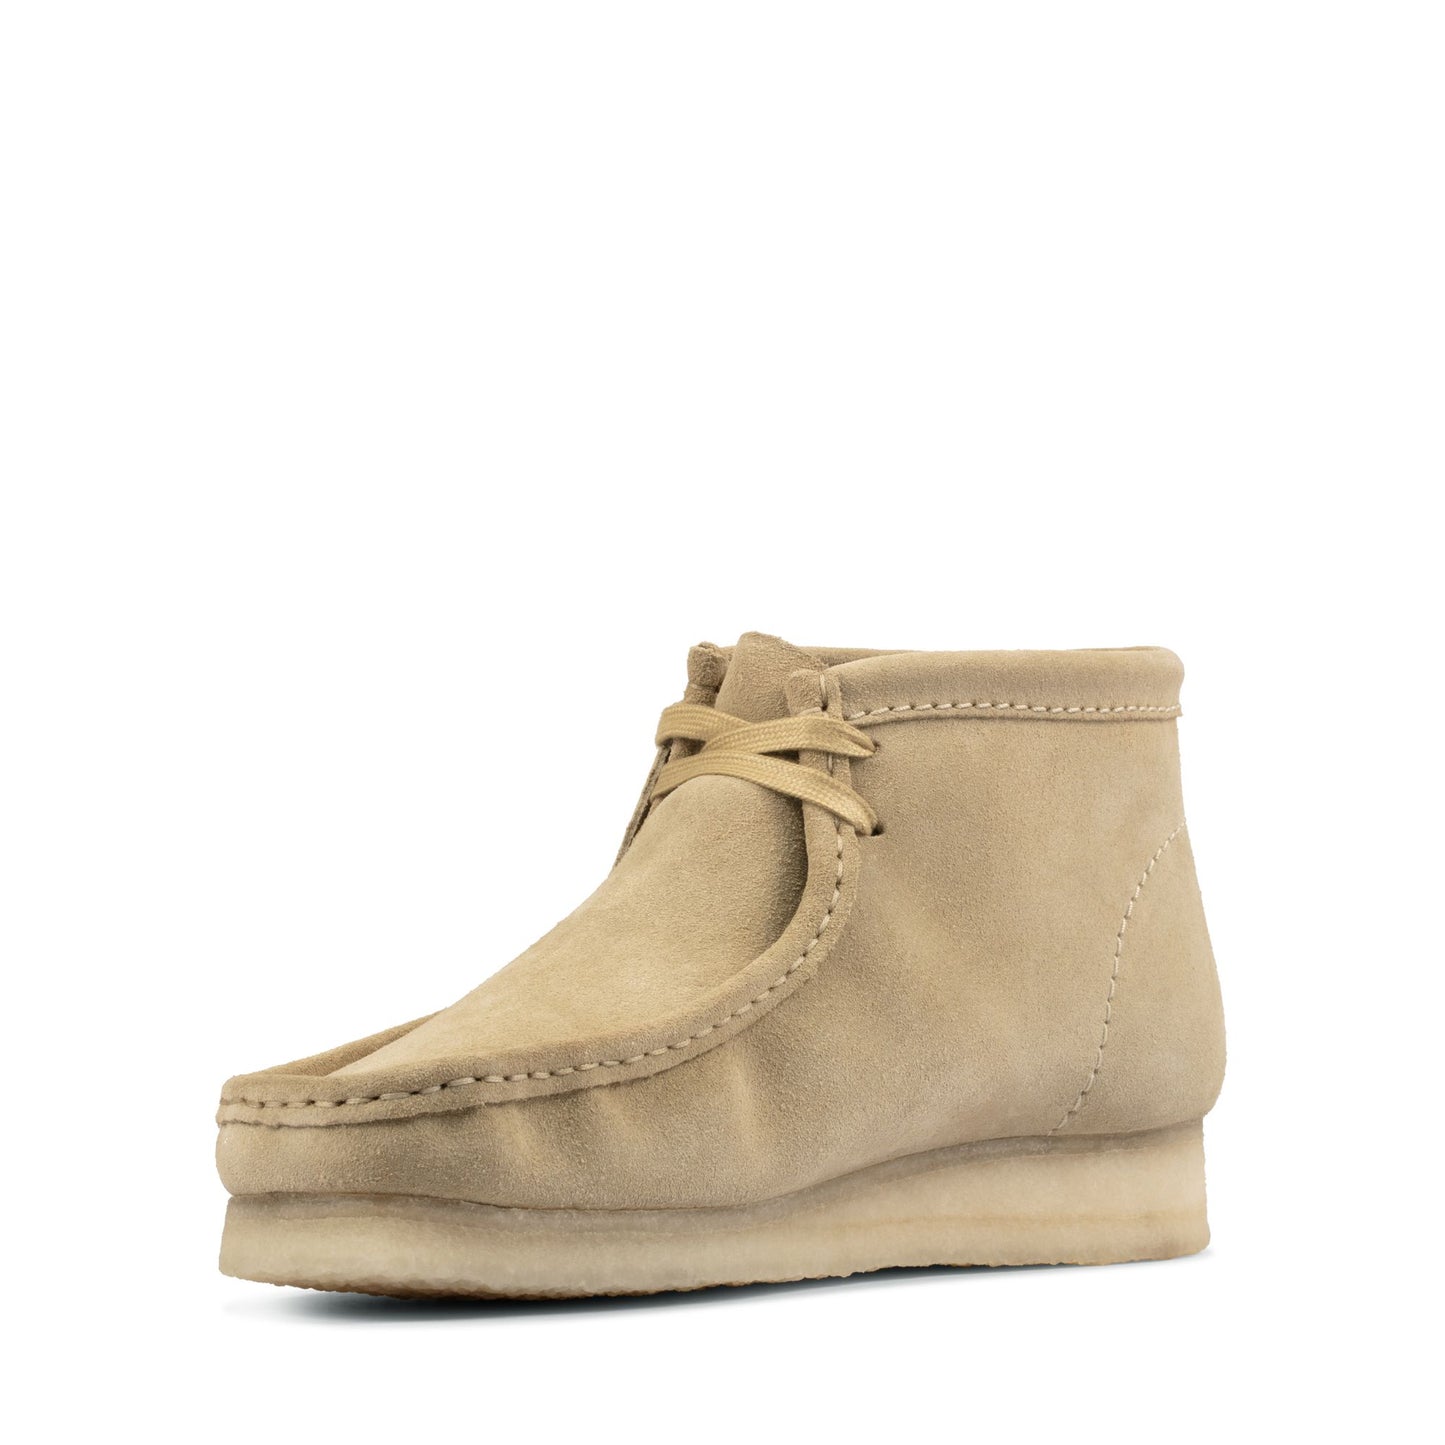 CLARKS WALLABEE BOOT - MAPLE SUEDE